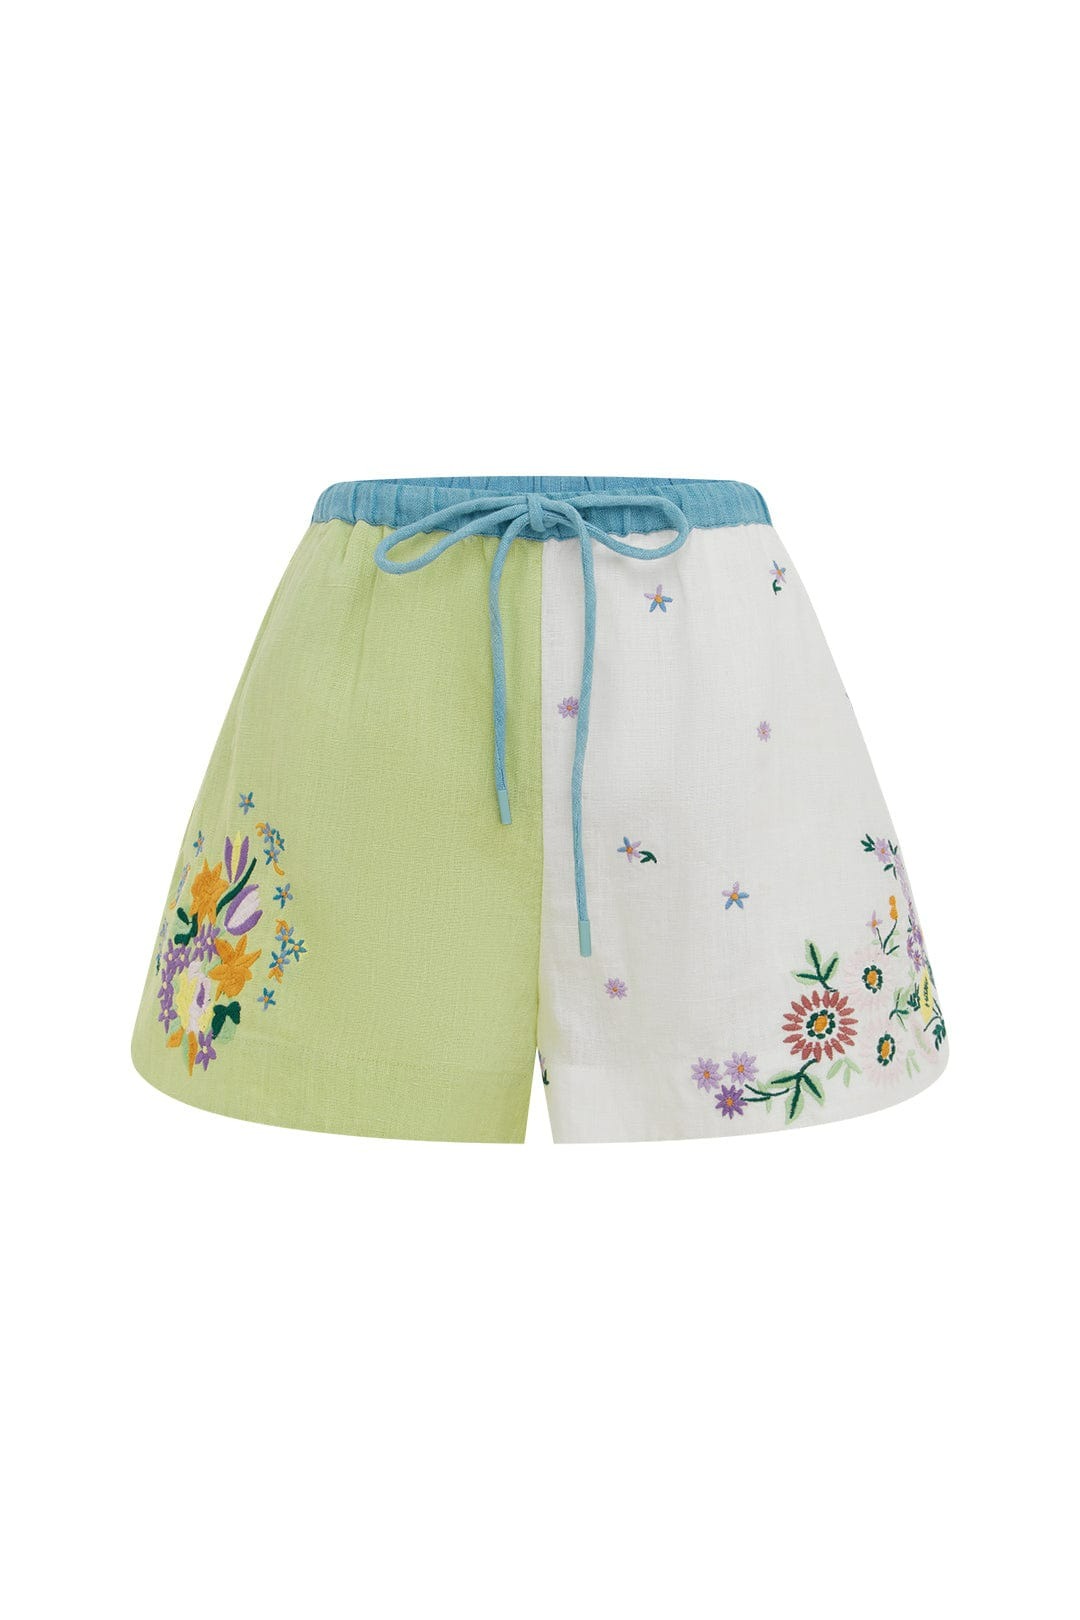 Alemais Willa Embroidered Short-0